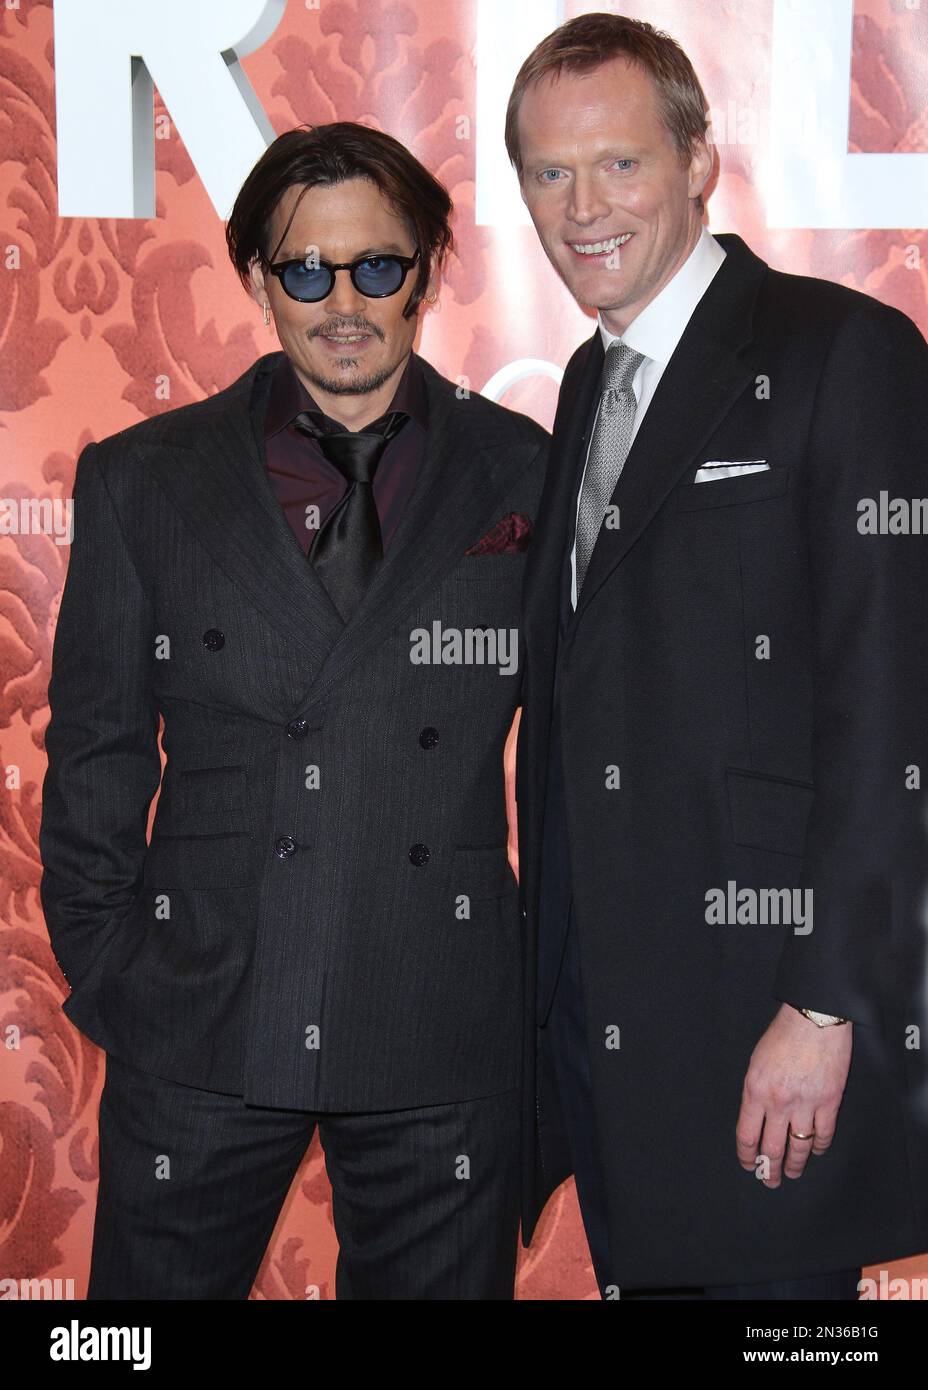 Actors Johnny Depp And Paul Bettany Pose For Photographers Upon Arrival At The Premiere Of The 